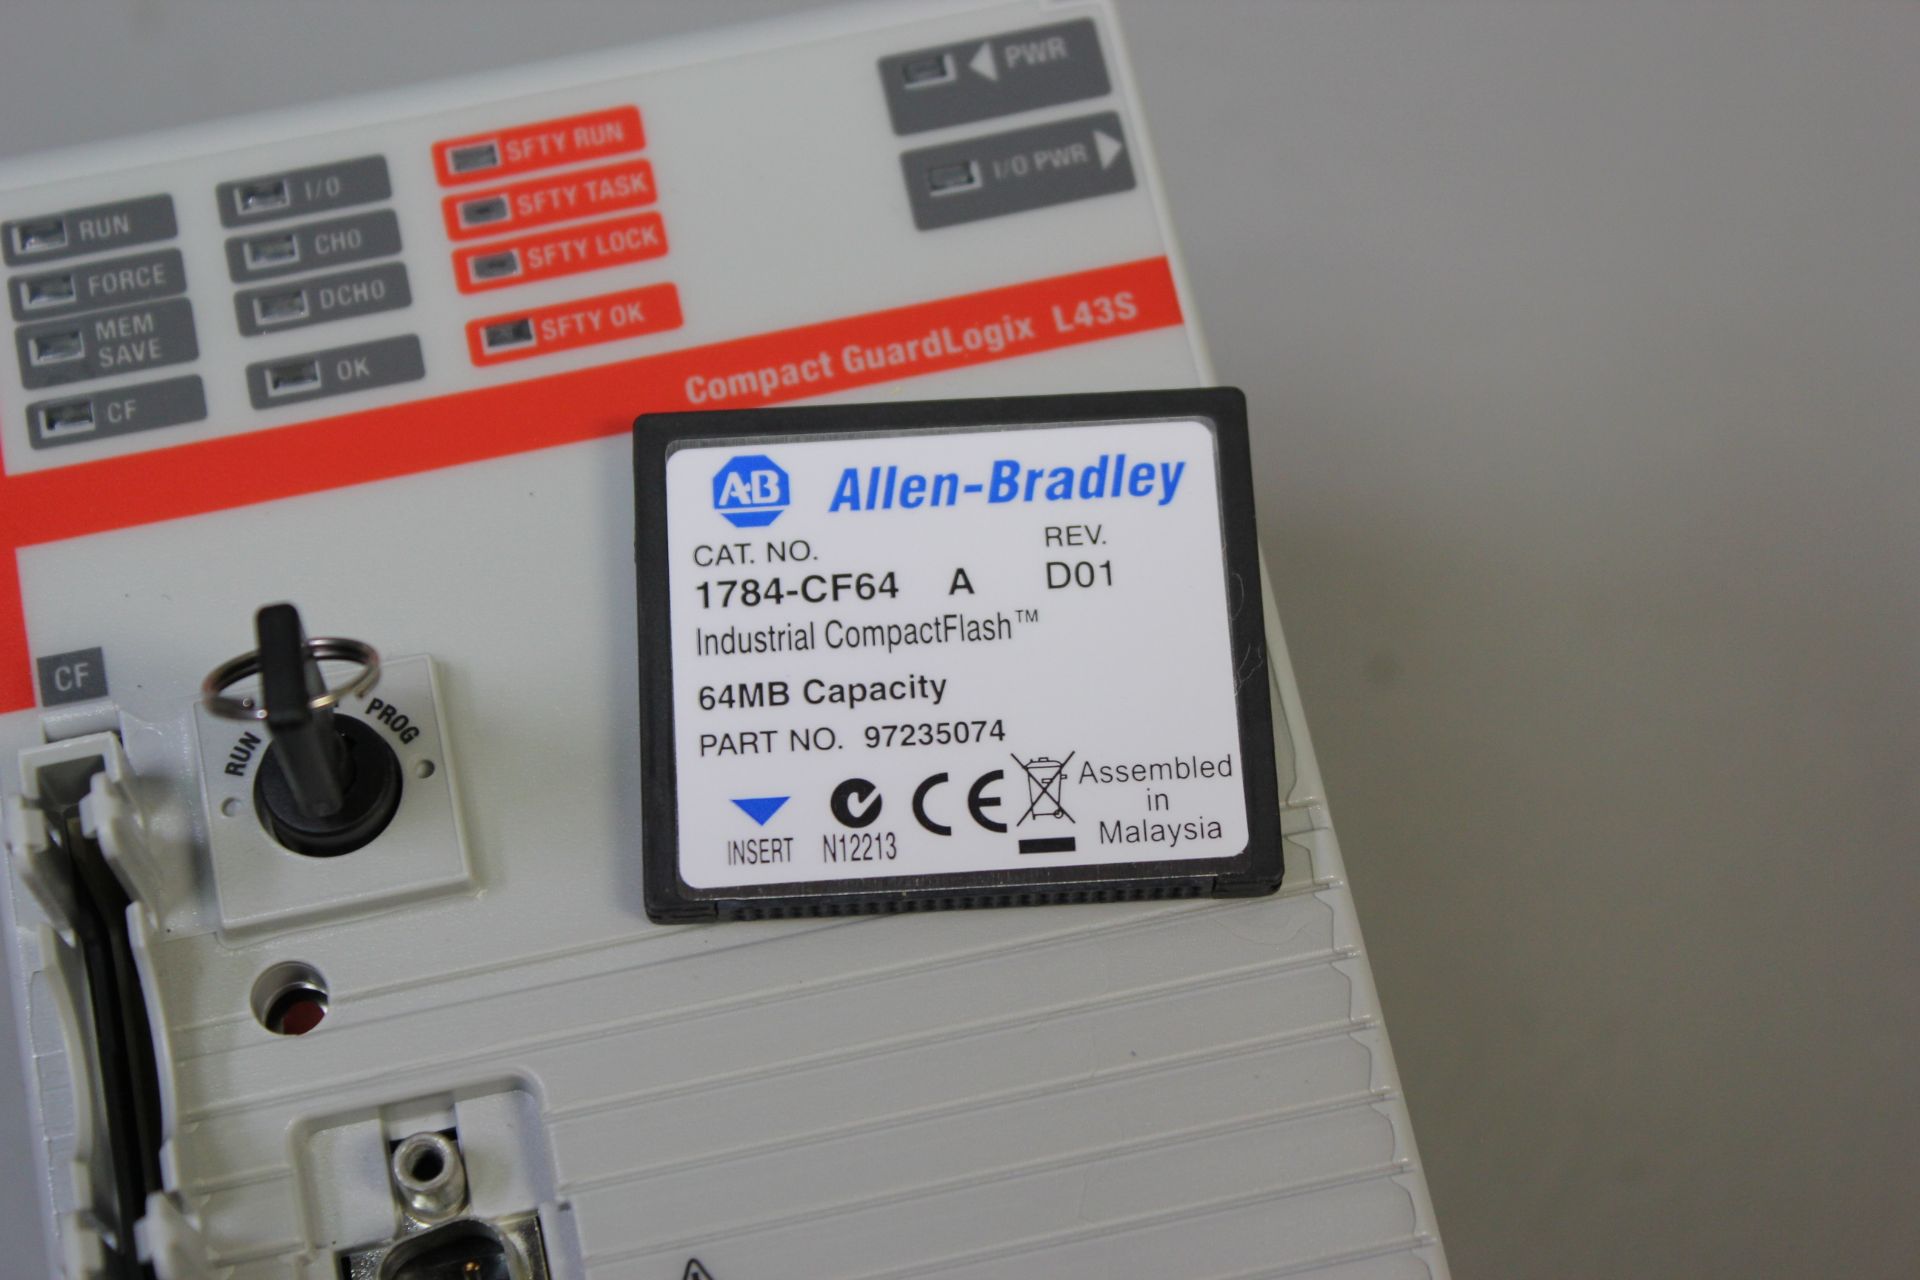 ALLEN BRADLEY COMPACT GUARDLOGIX SAFETY CPU - Image 4 of 7